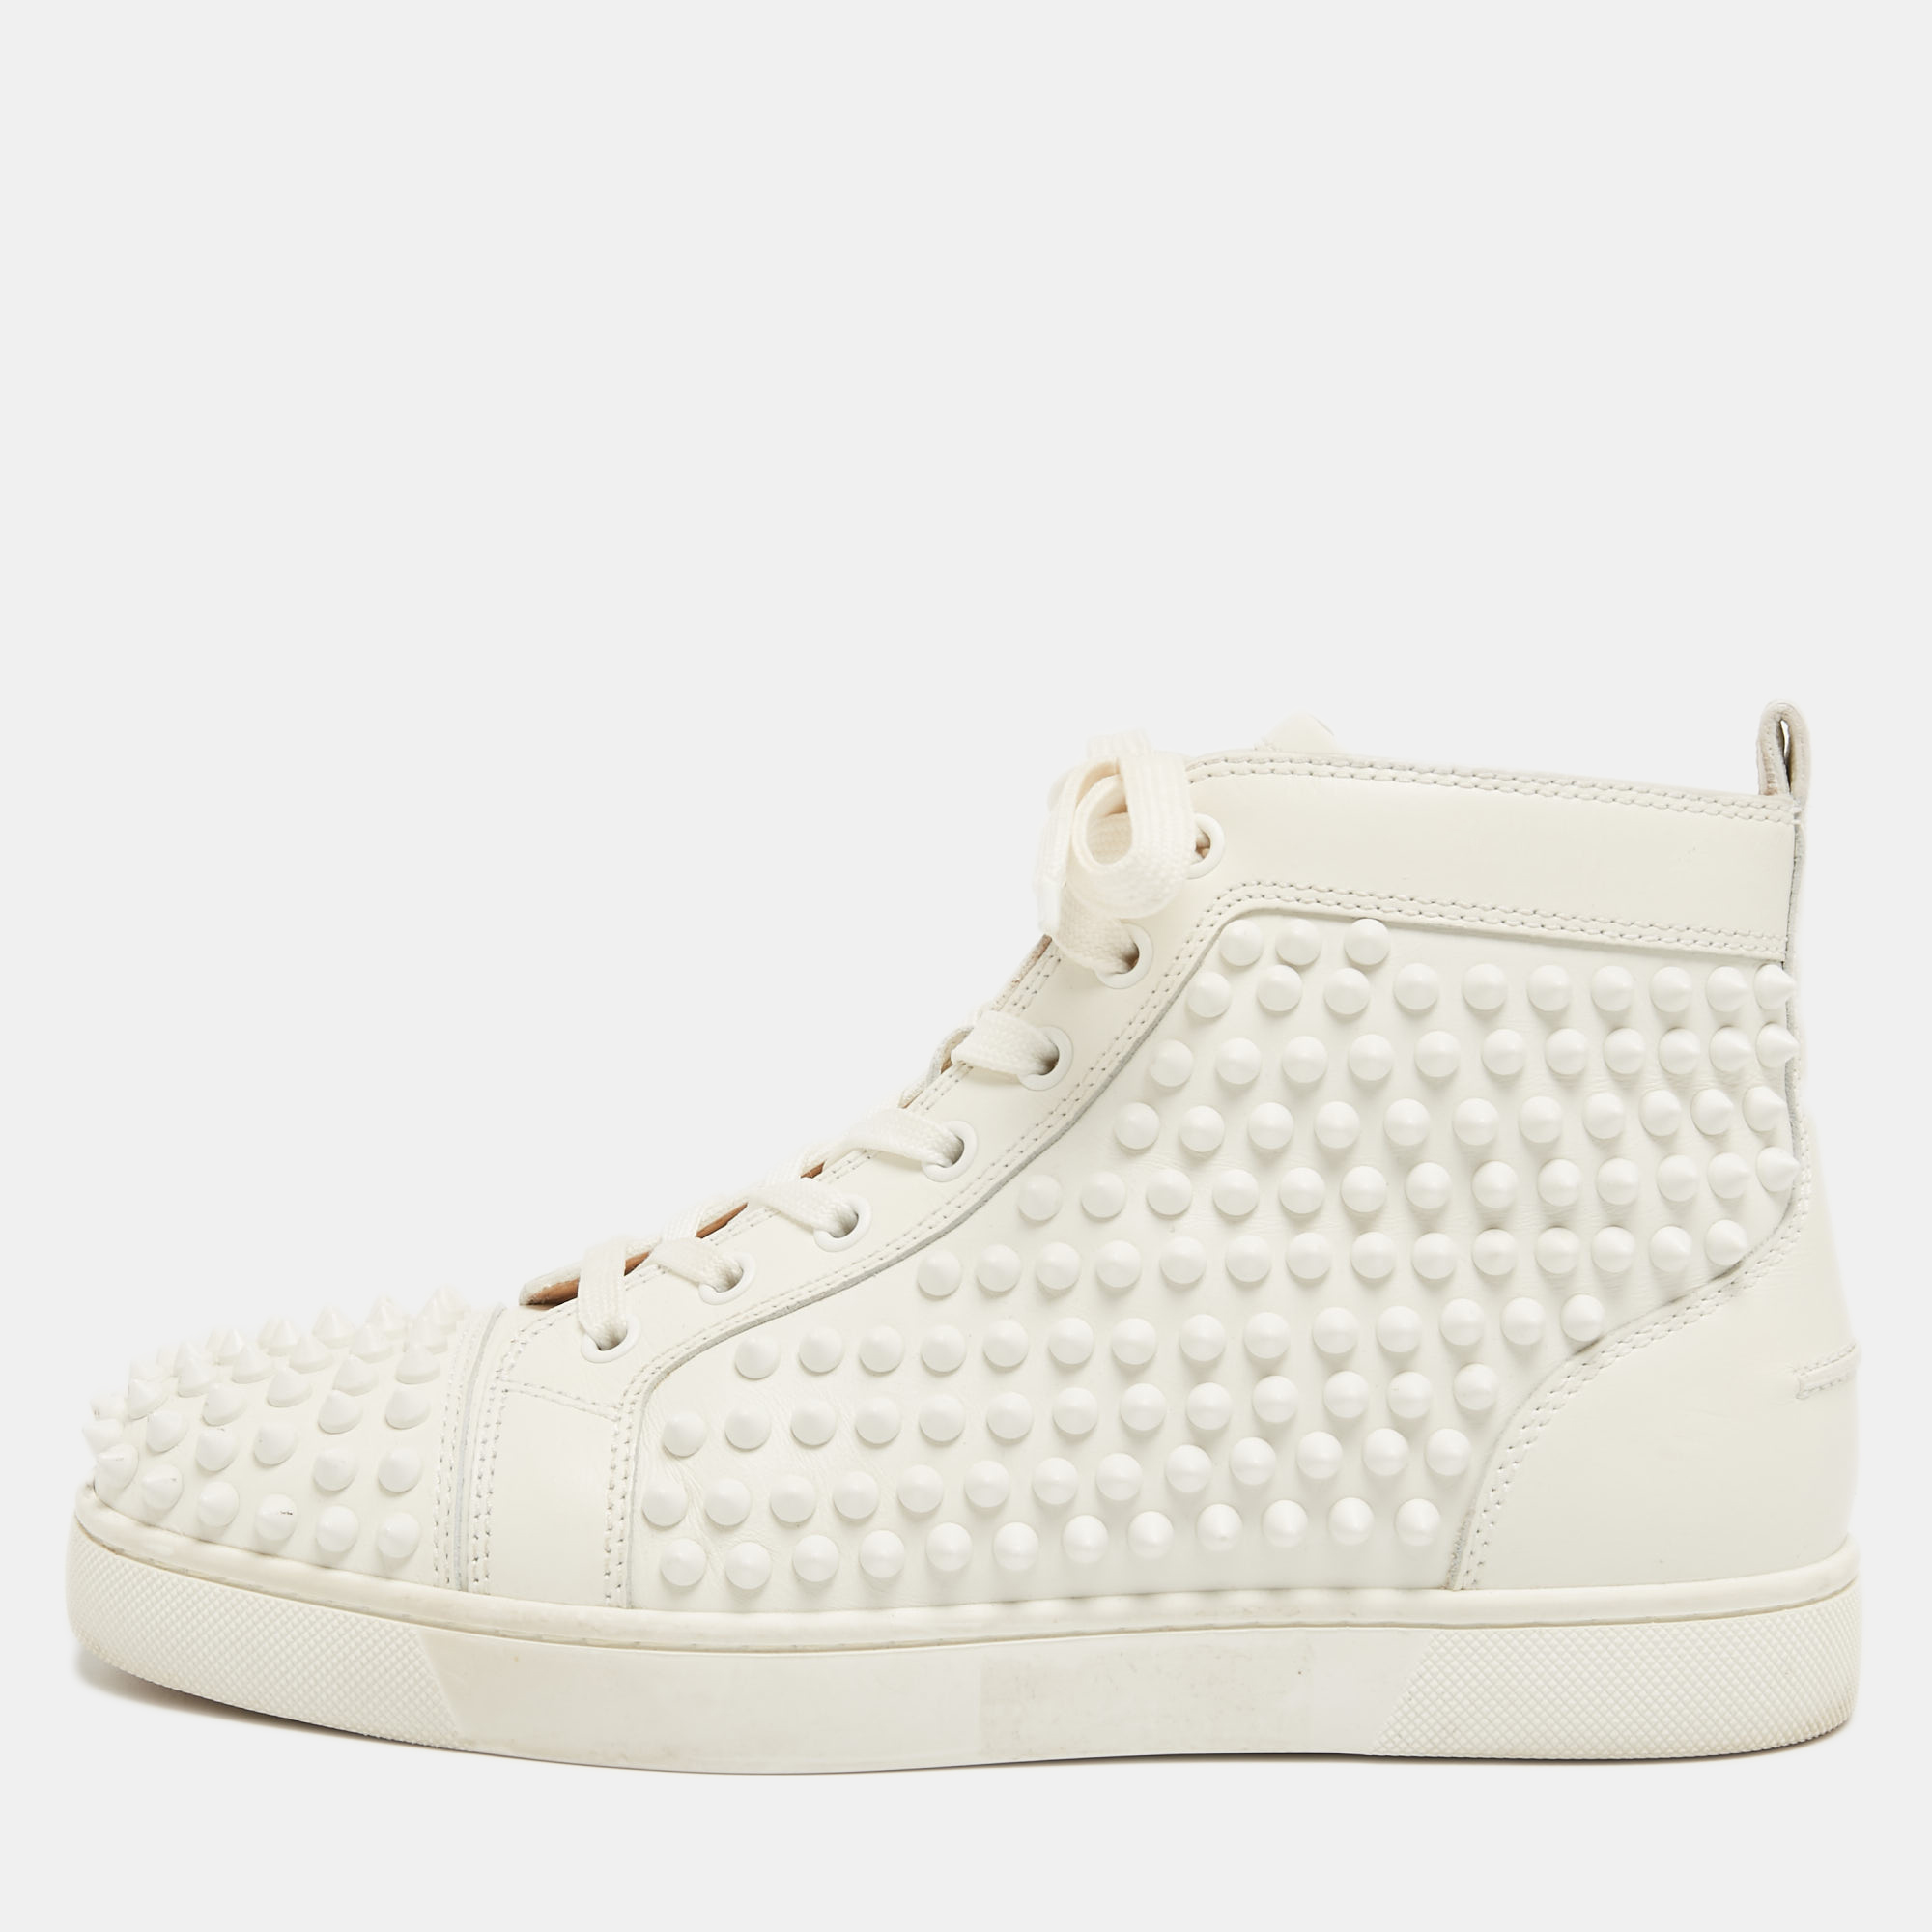 Pre-owned Christian Louboutin White Leather Louis Spikes High Top Sneakers Size 39